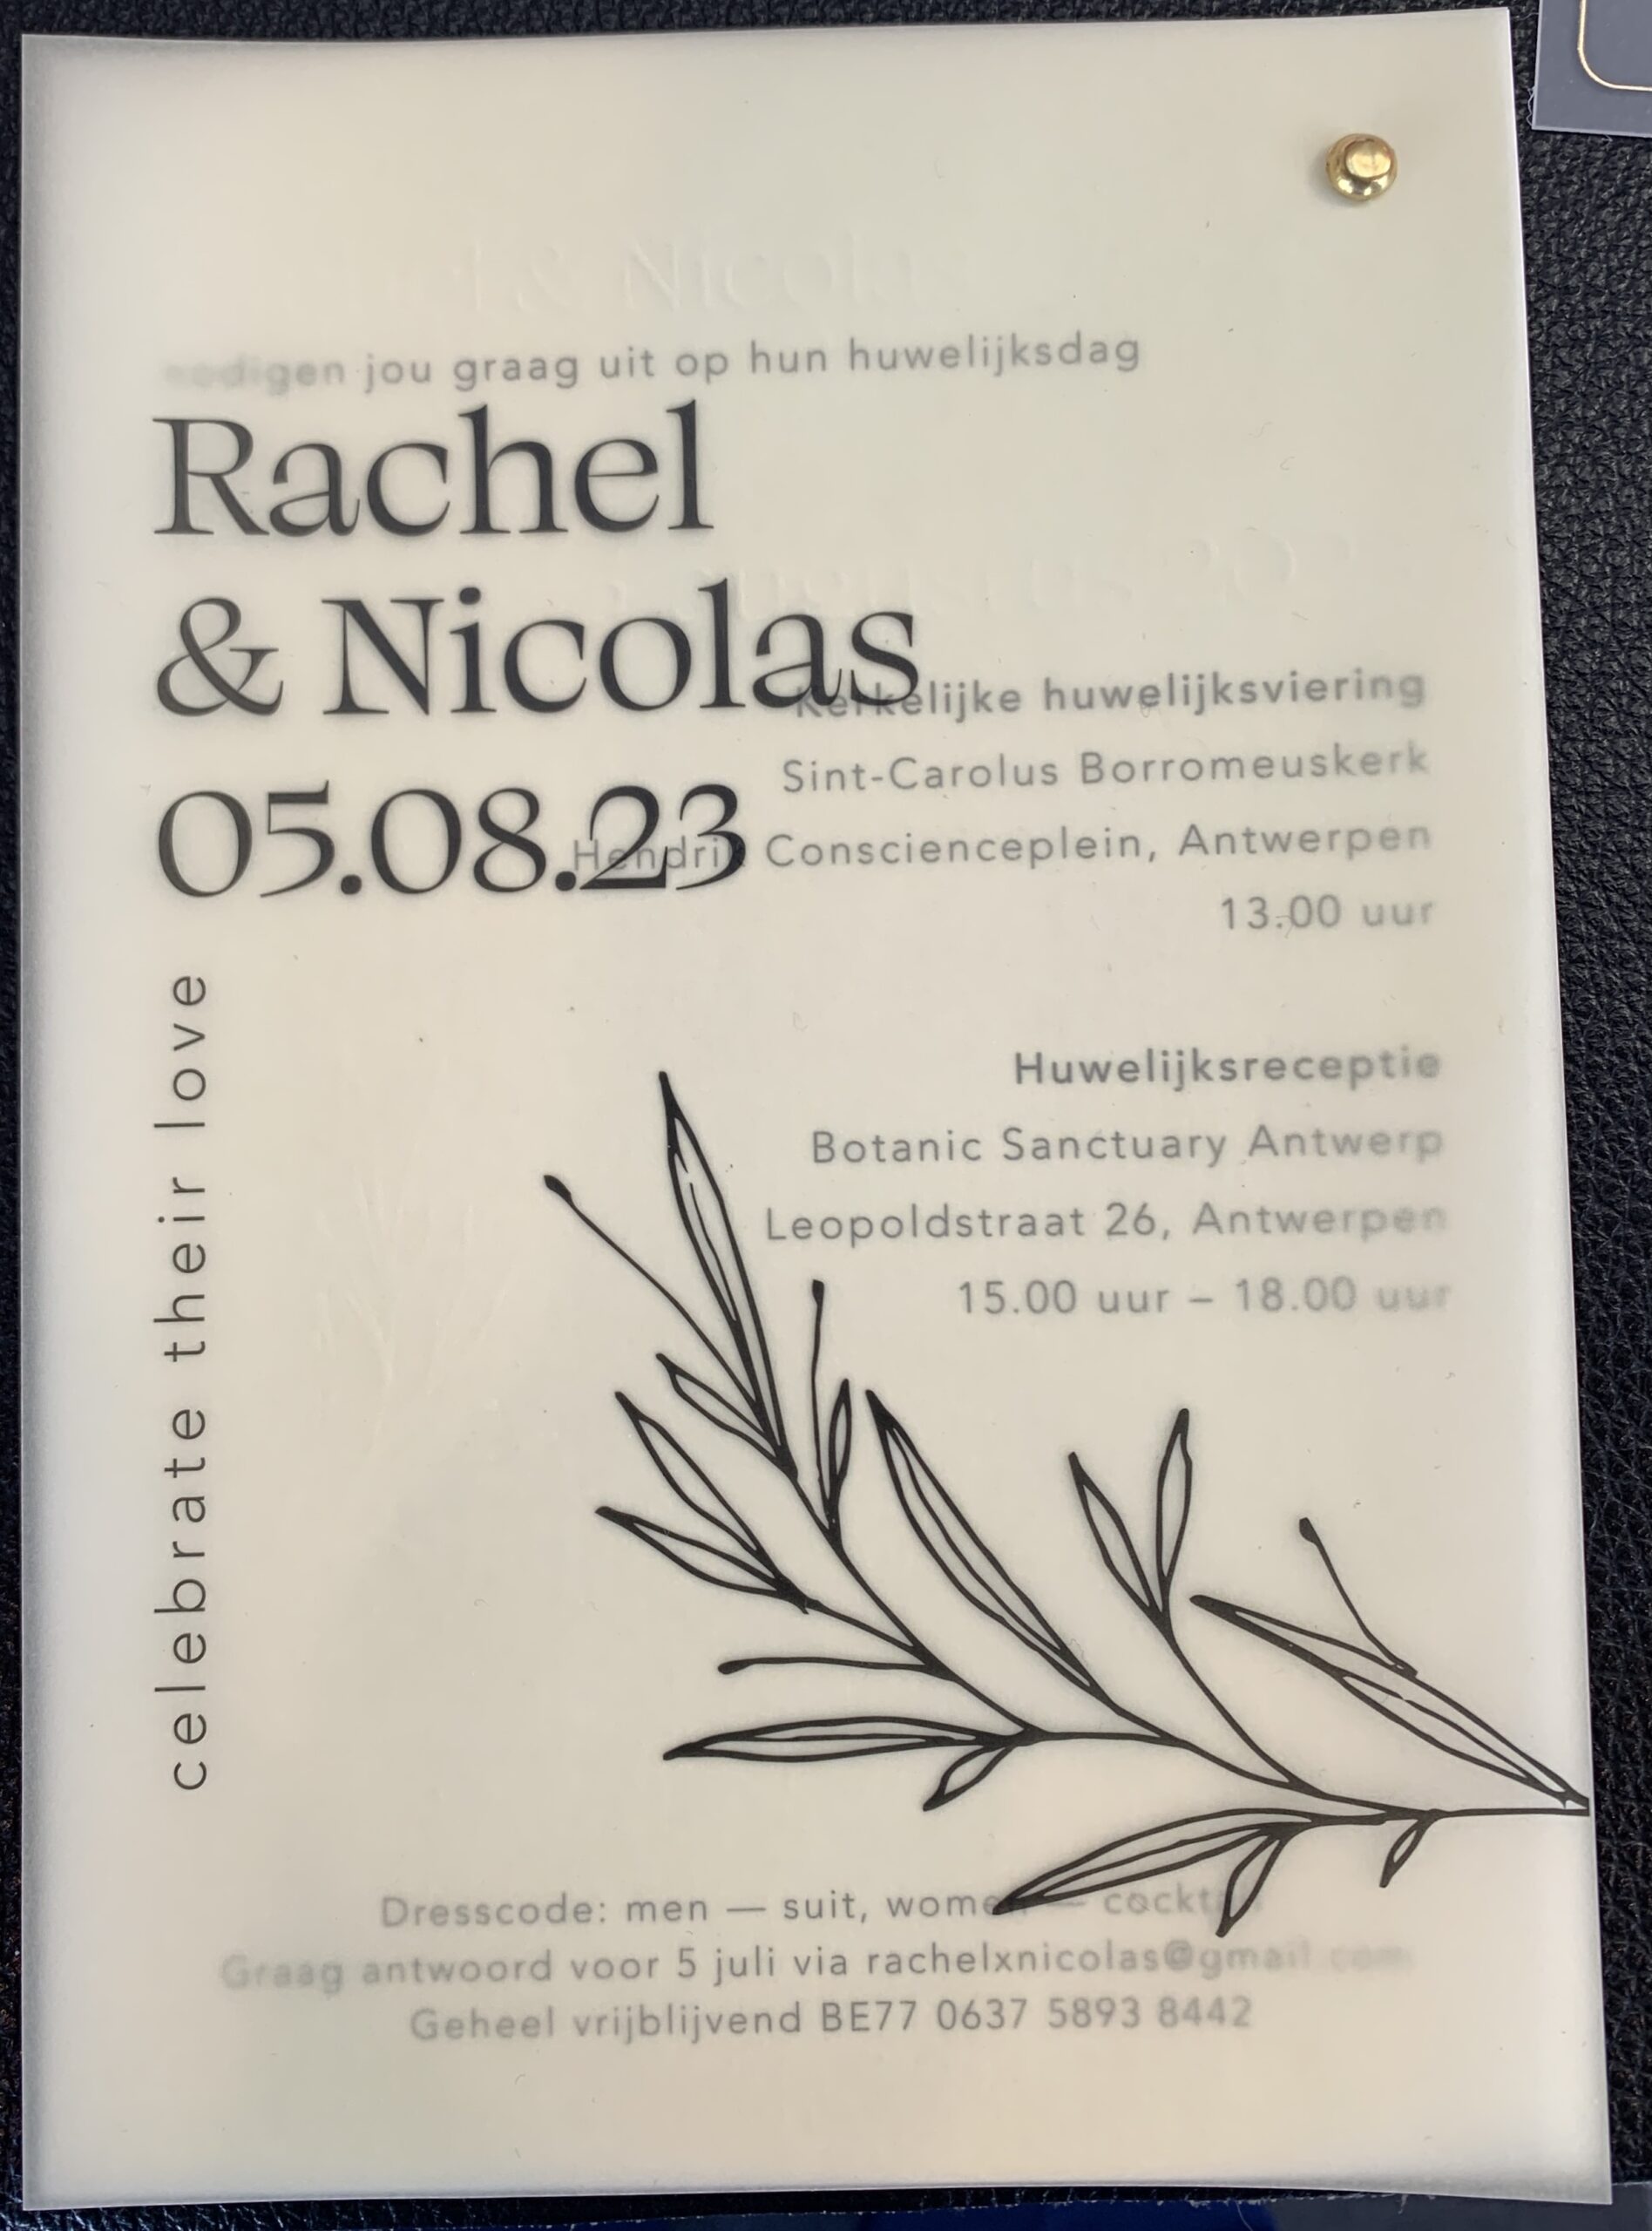 You are currently viewing Rachel & nicolas